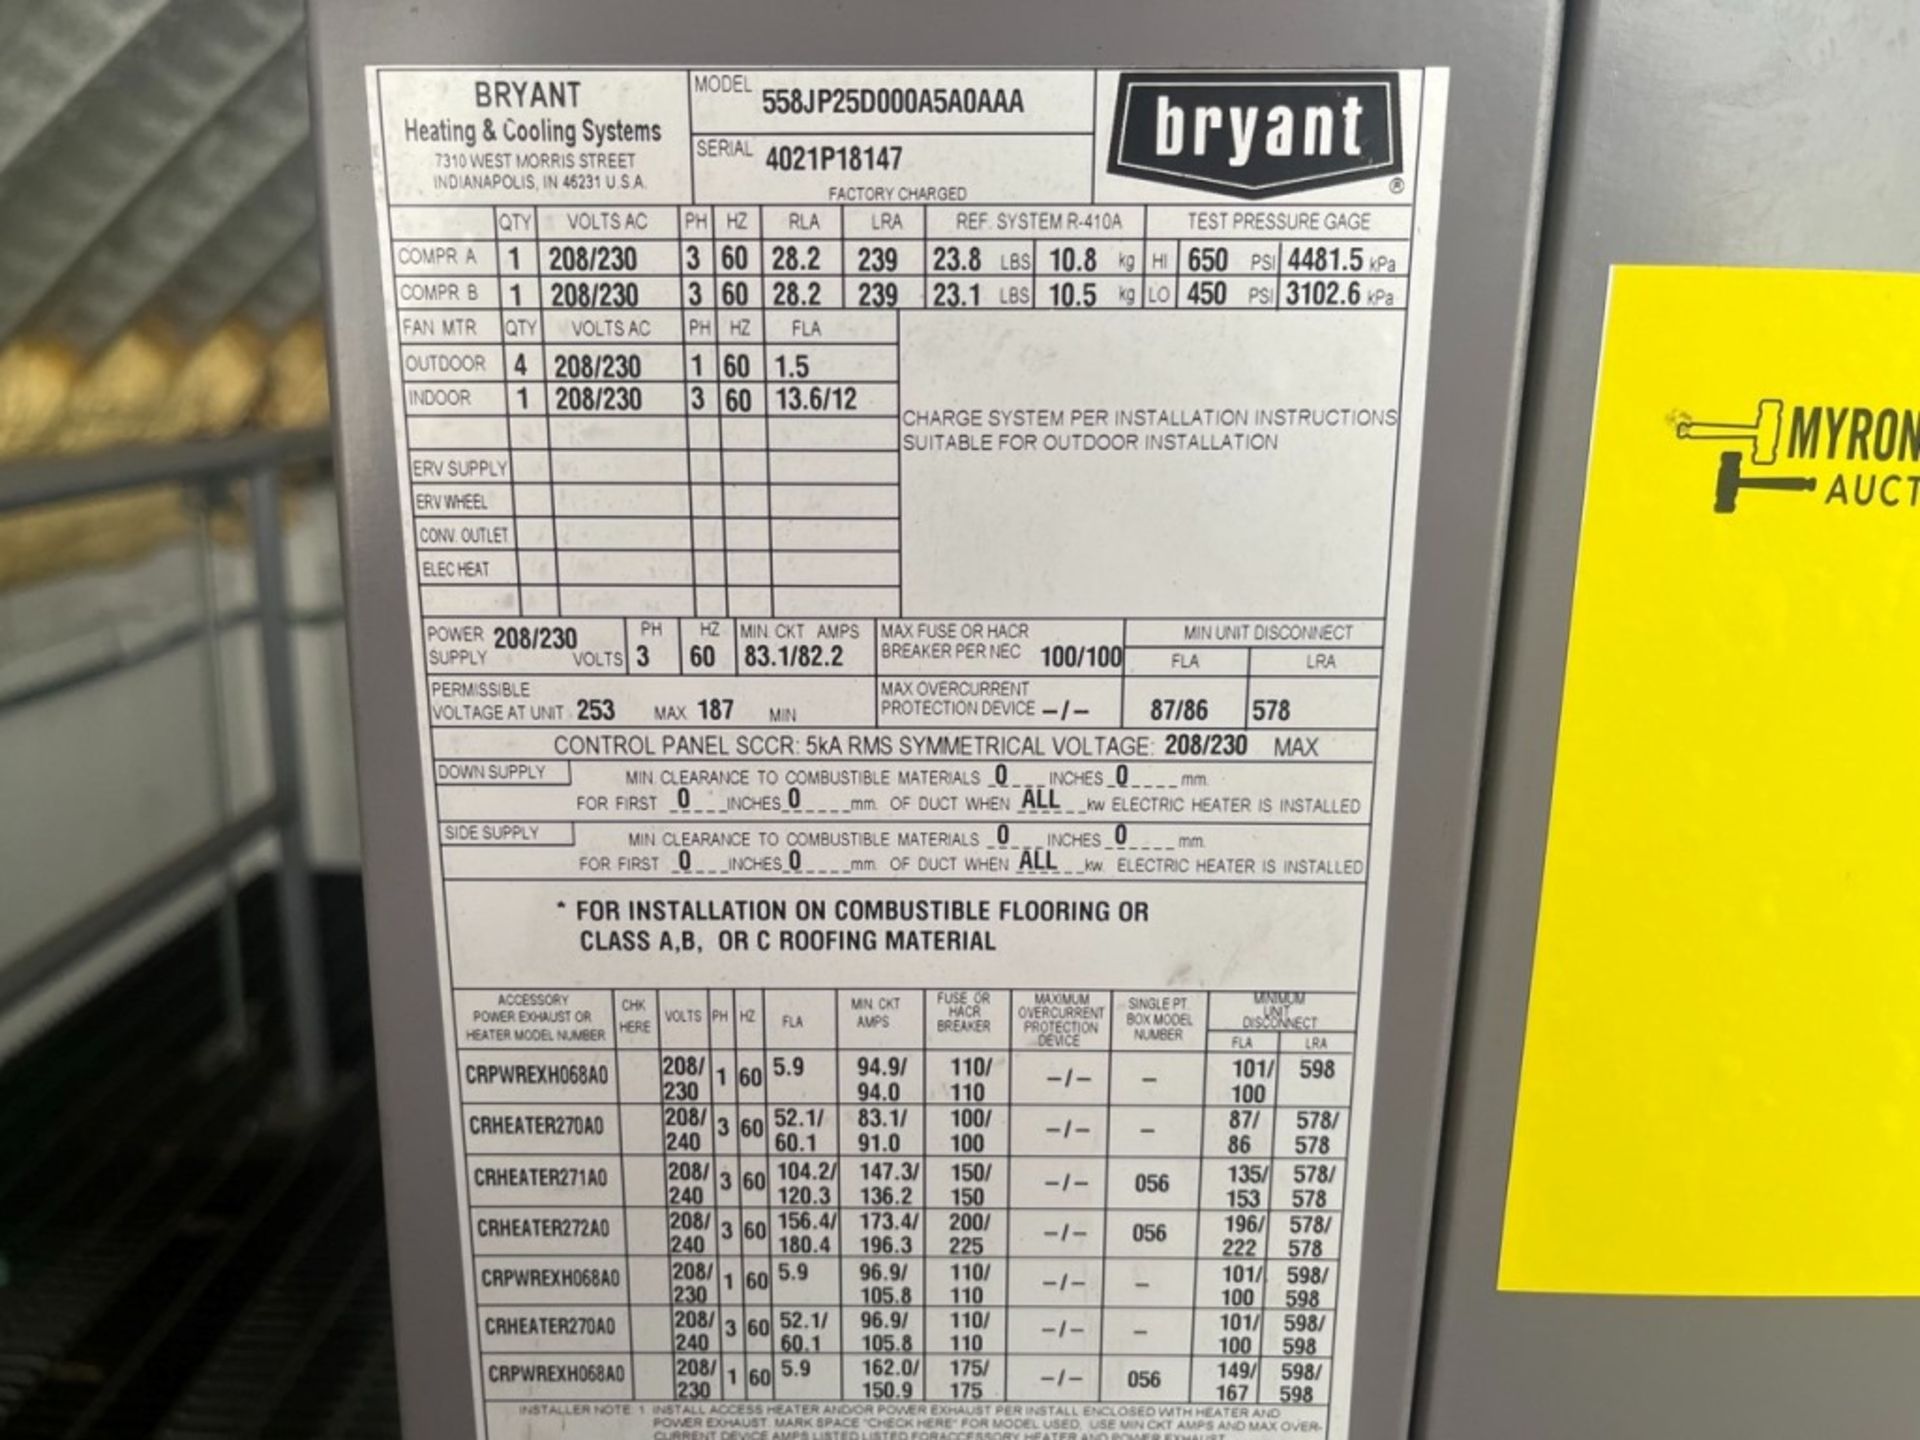 (NEW) Bryant Unit Package Air Model 558JP25D000A5A0AAAAA, Serial No. 4021P18147; Includes ductwork - Image 23 of 26